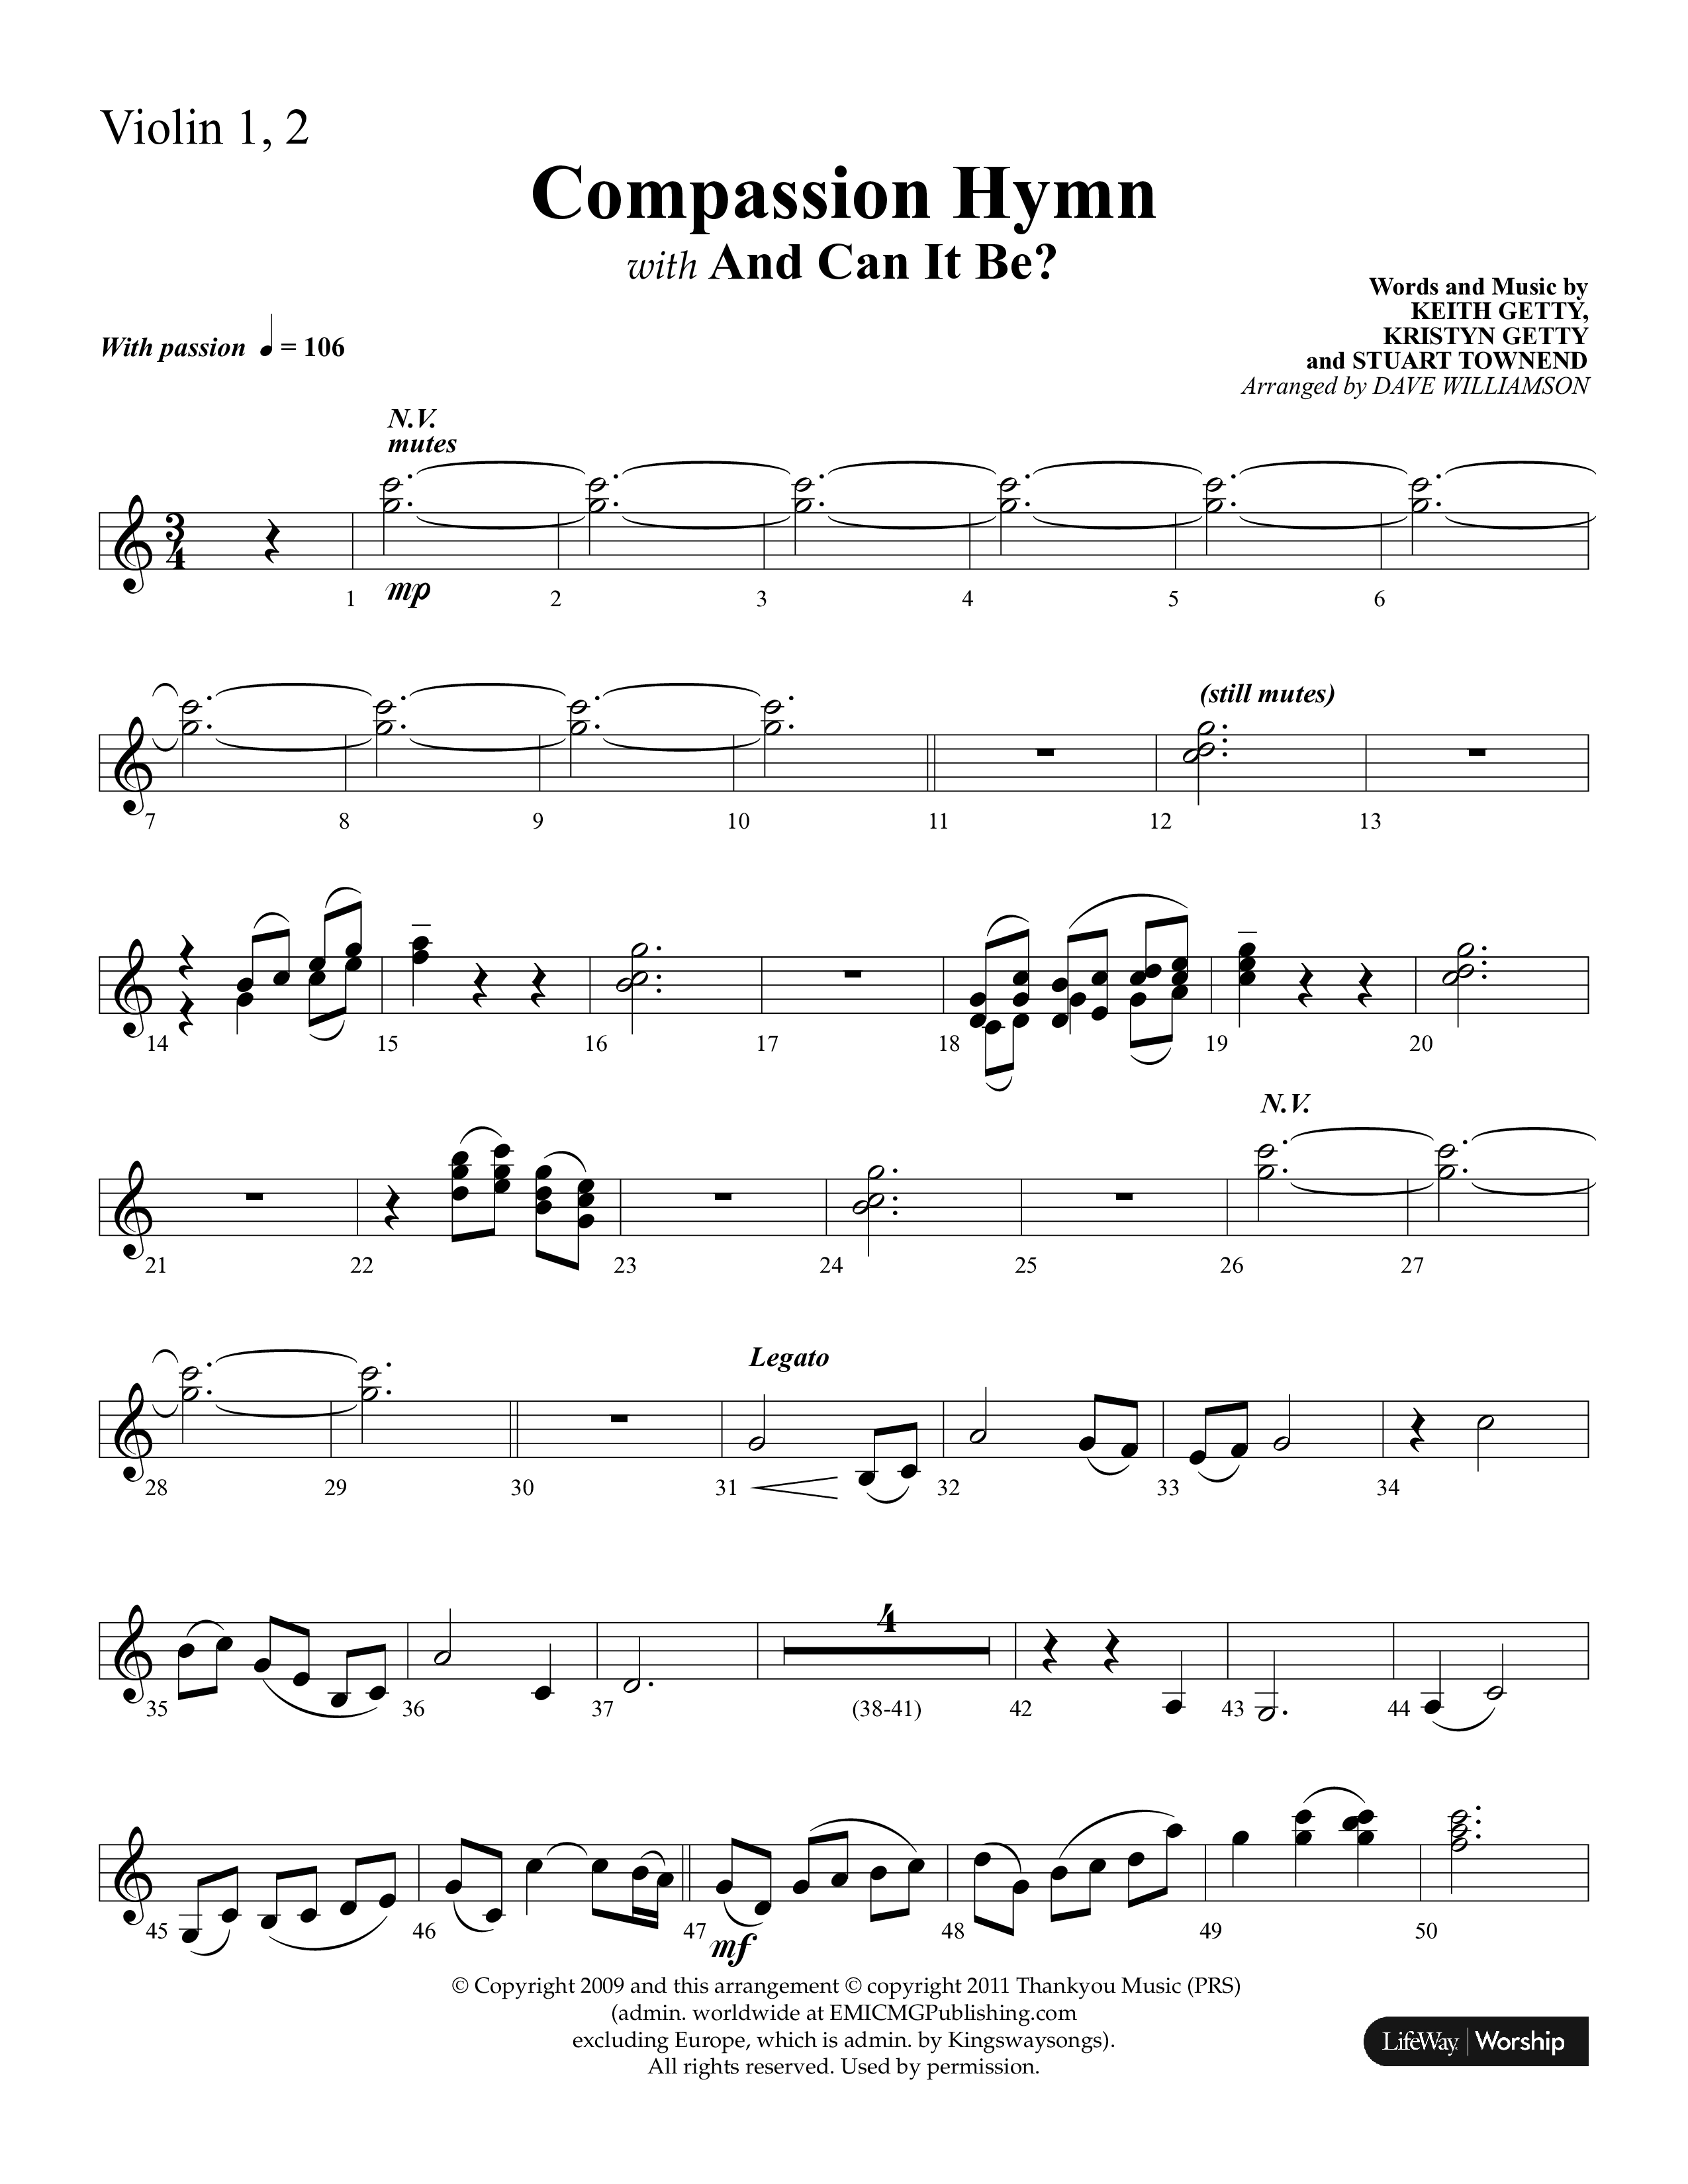 Compassion Hymn (with And Can It Be) (Choral Anthem SATB) Violin 1/2 (Lifeway Choral / Arr. Dave Williamson)